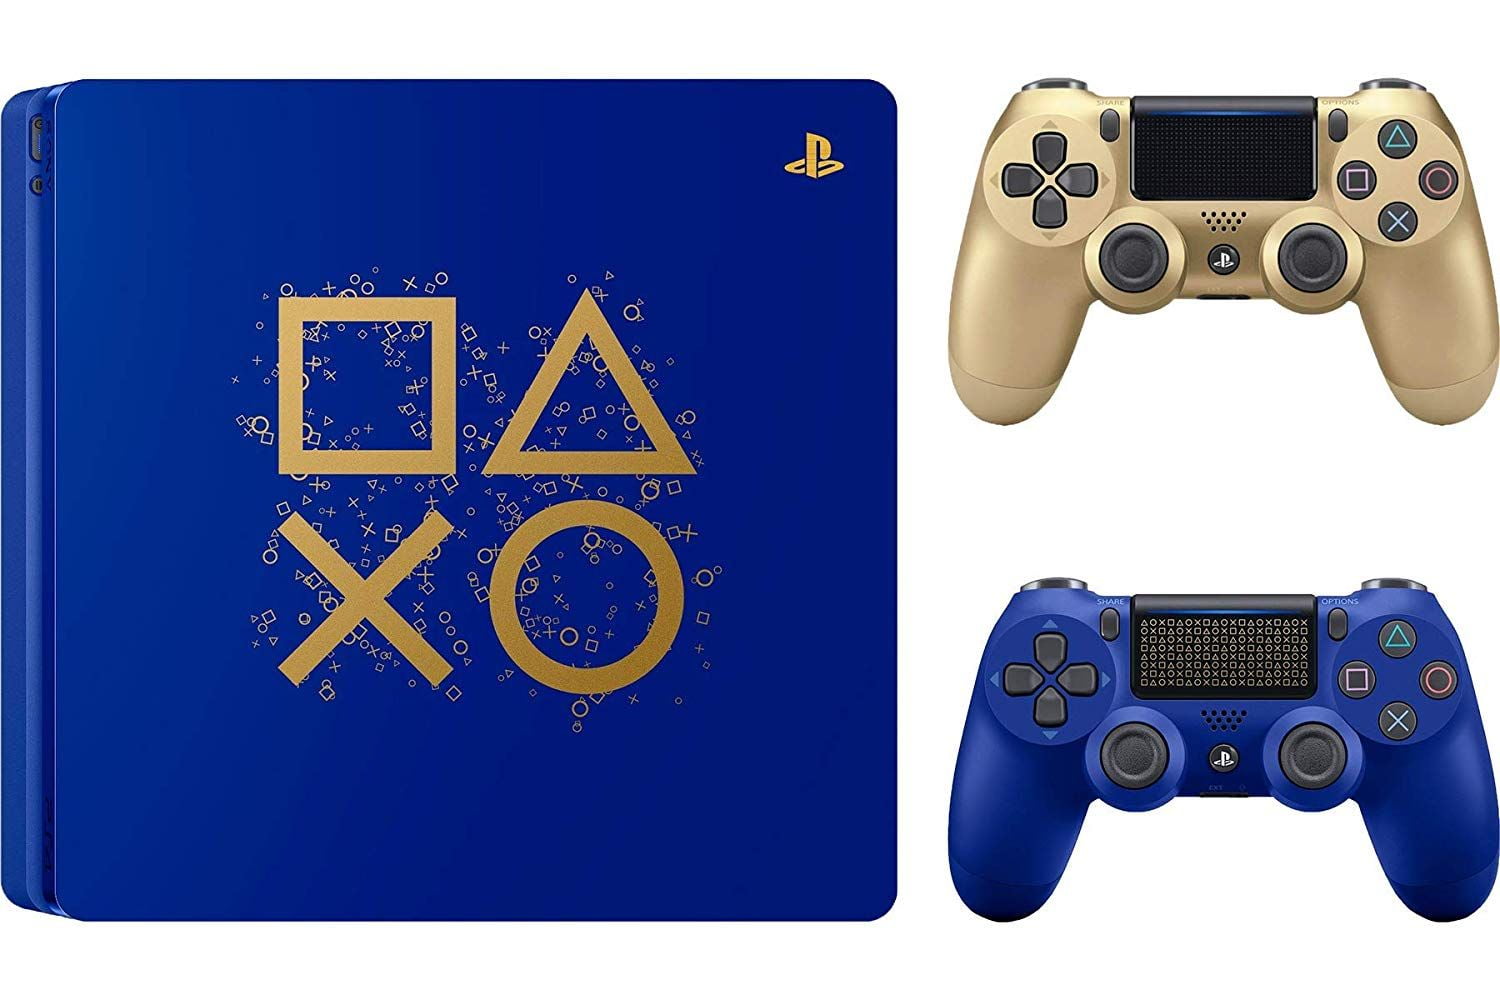 Playstation PS4 Days of Play Limited Edition Bundle: Days of Play PS4 Slim 1TB Console with Limited Edition Controller DualShock 4 Wireless and Extra Gold Wireless Controller - Walmart.com